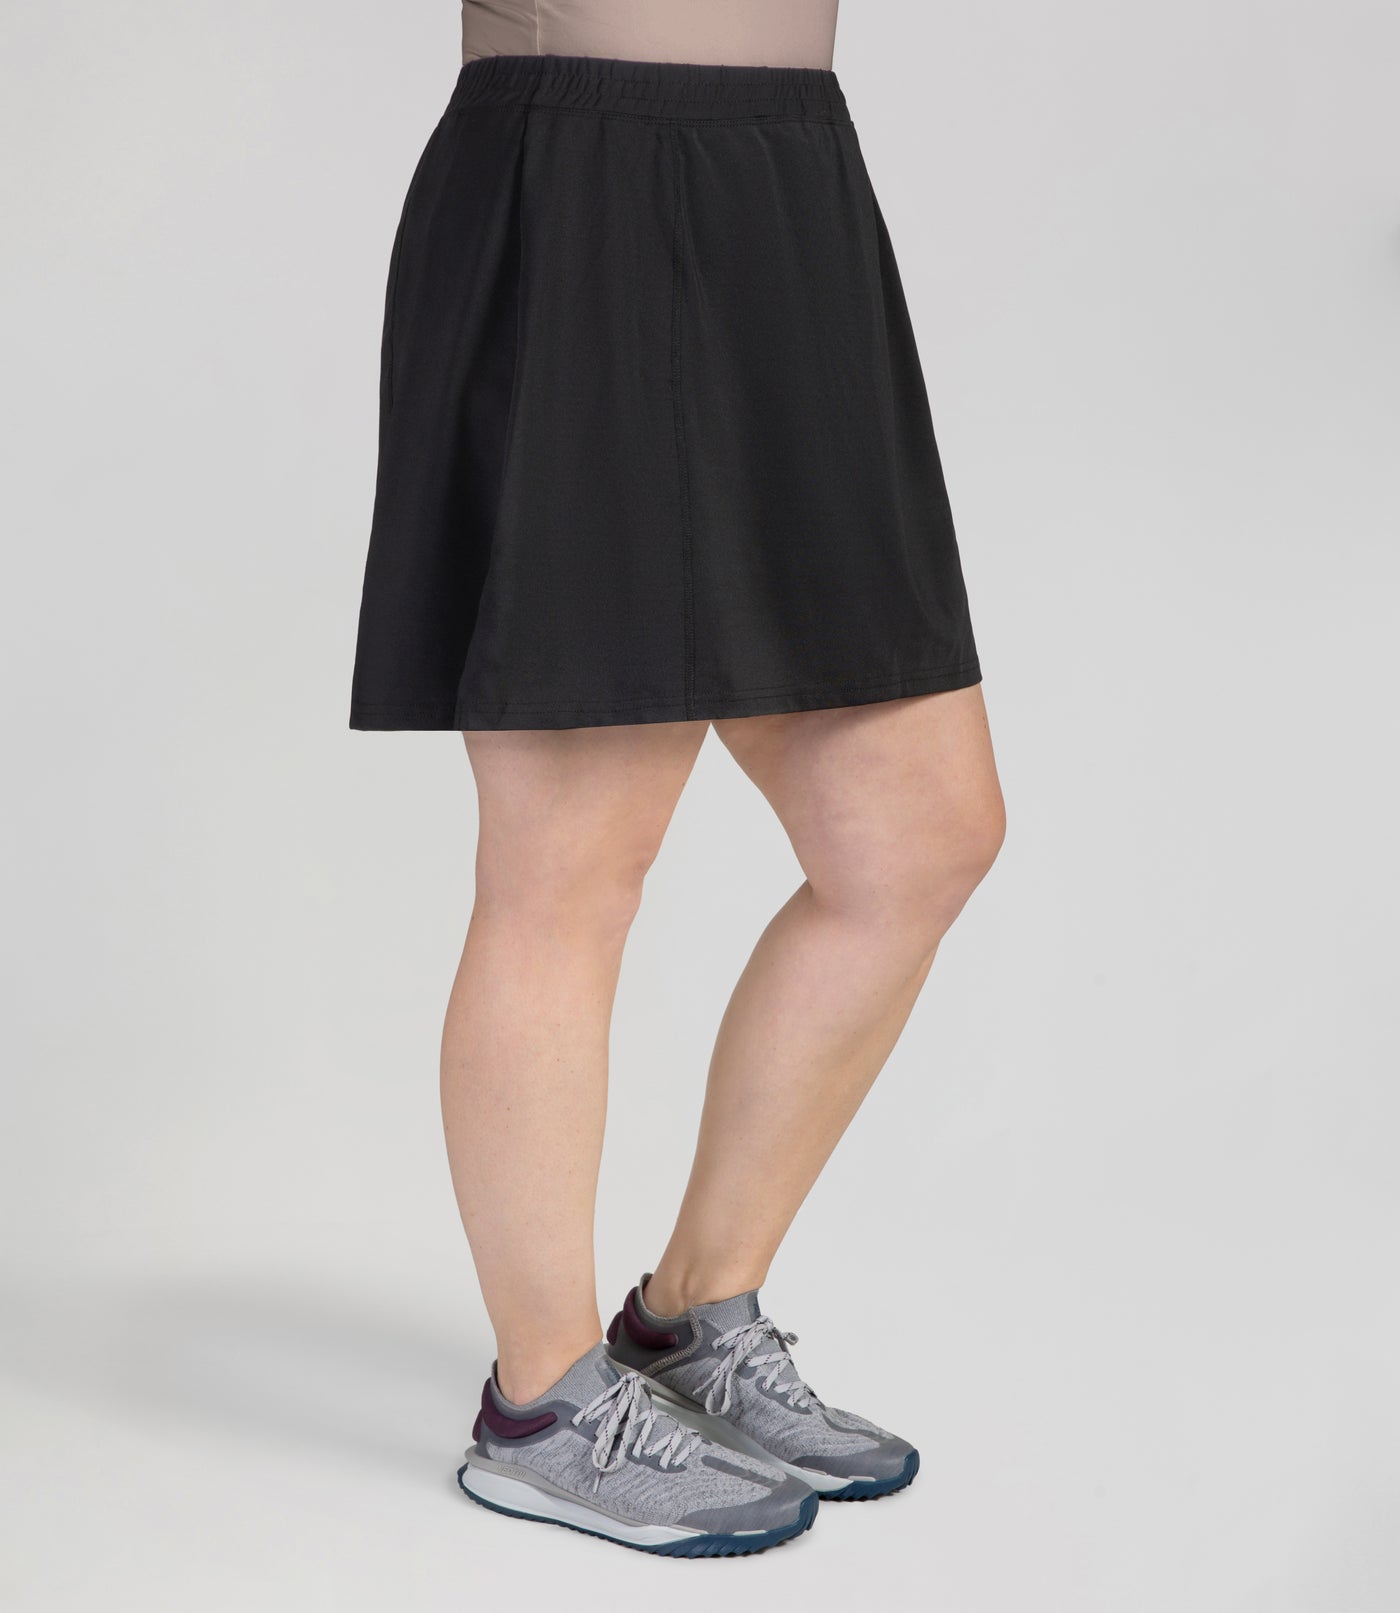 Bottom half of plus sized woman, front view, wearing JunoActives Quikwik lite skirted short in color black. Skirt hem is a few inches above knee.